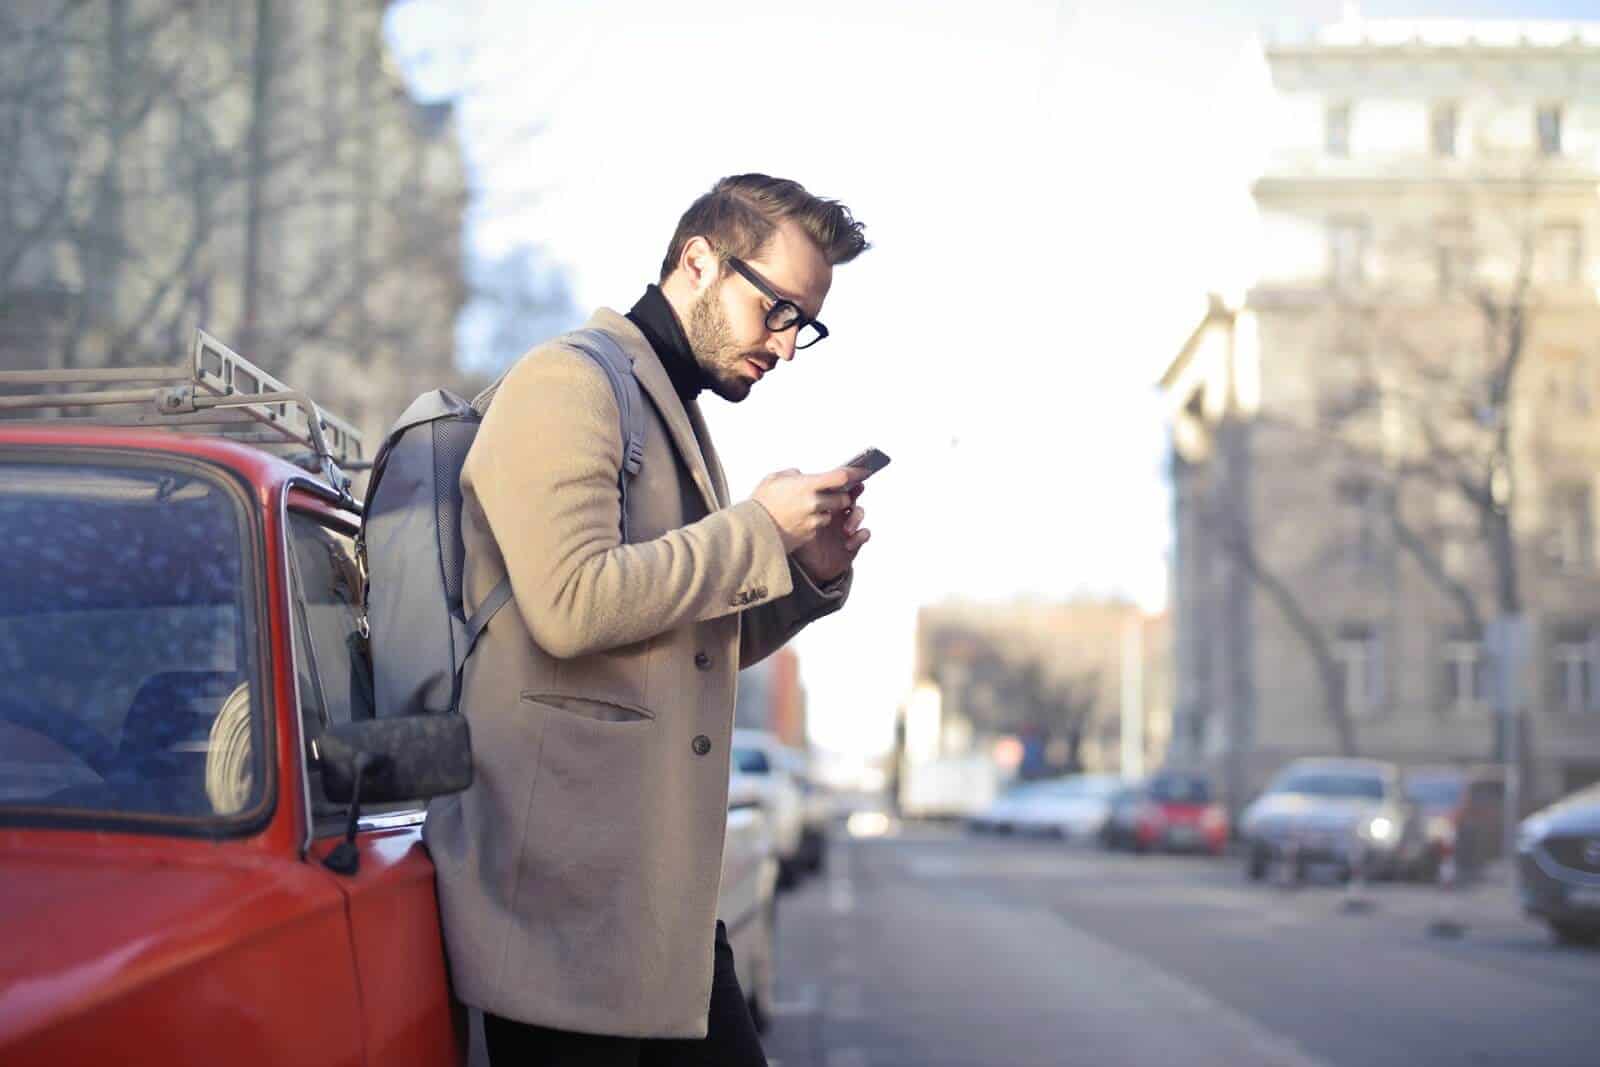 Man next to a car in beige coat holding phone